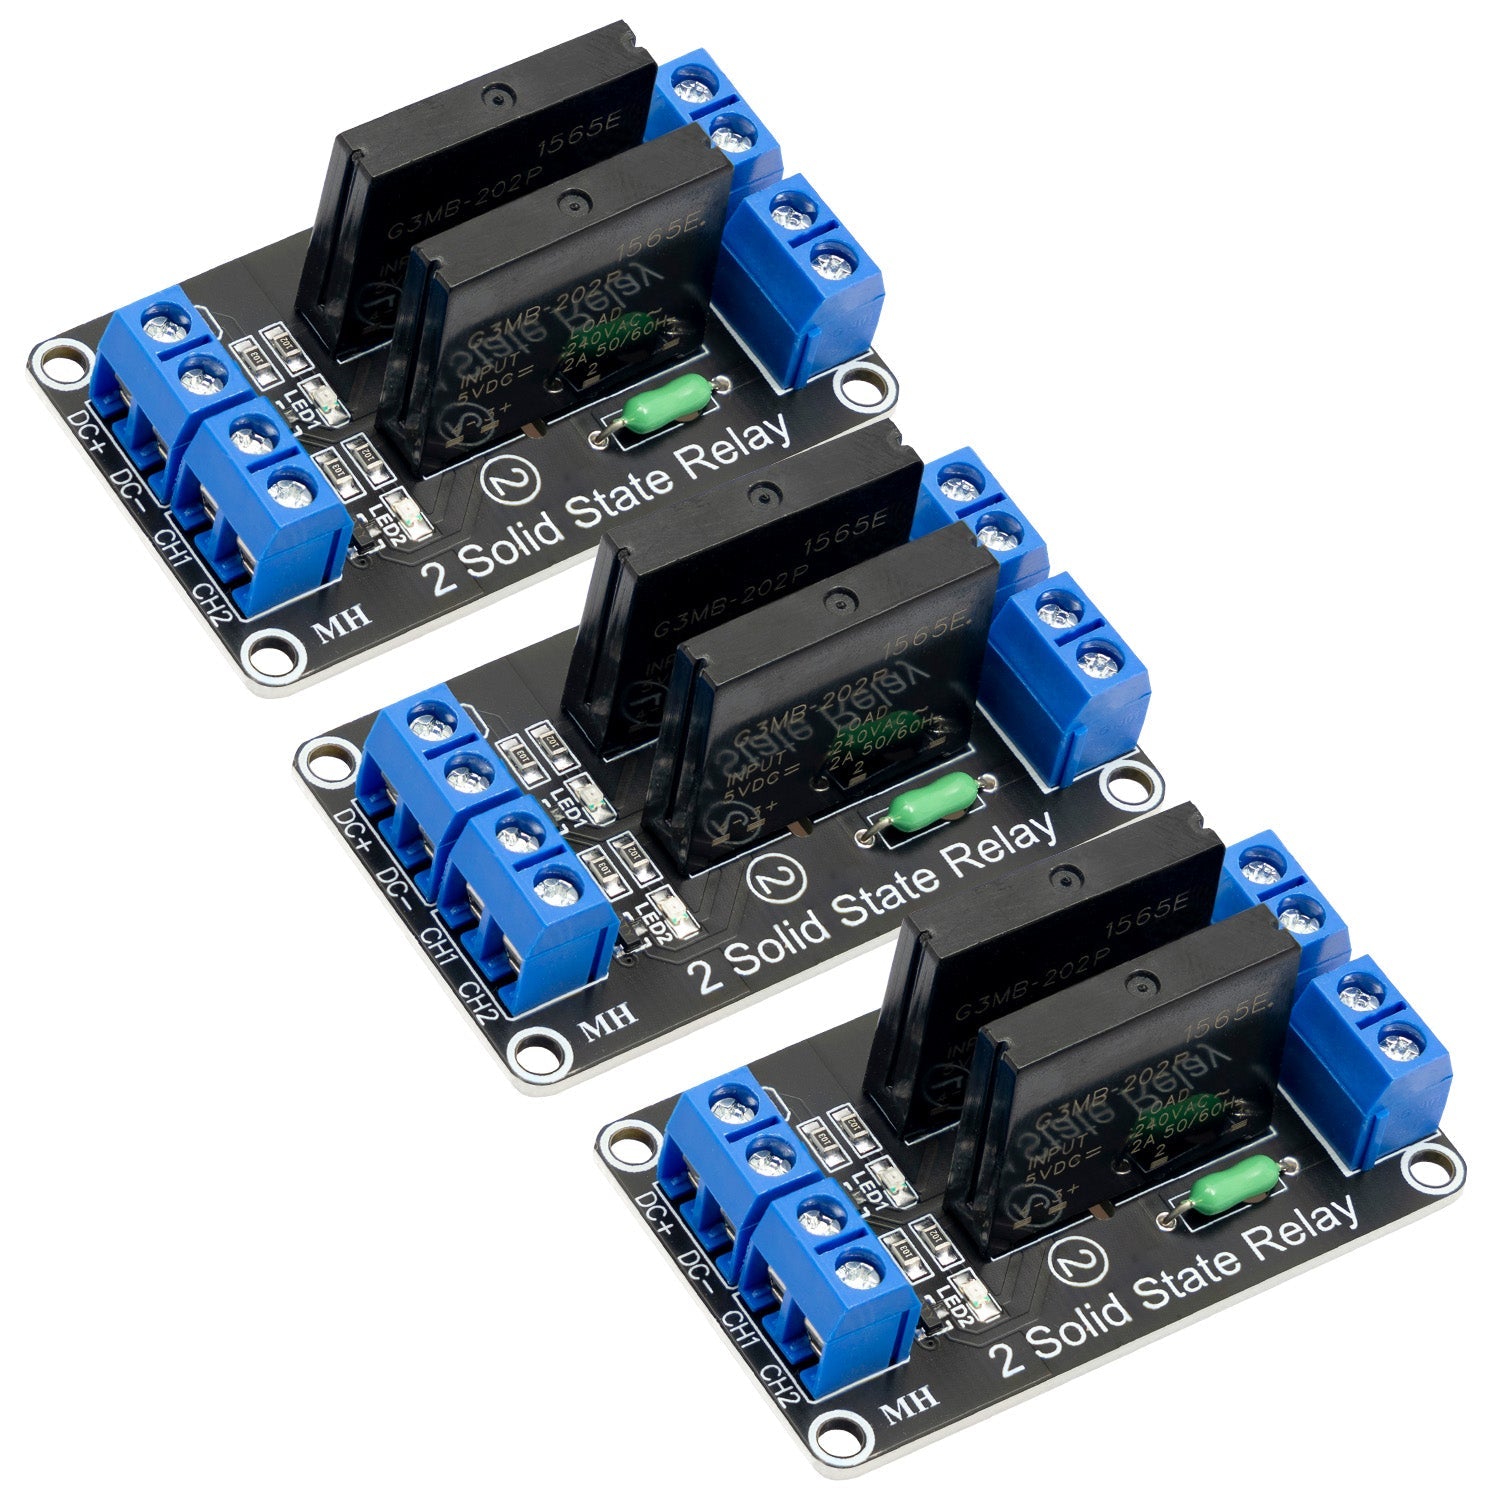 2 Channel Solid State Relay 5V DC Low Level Trigger Power Switch Compatible with Arduino and Raspberry Pi